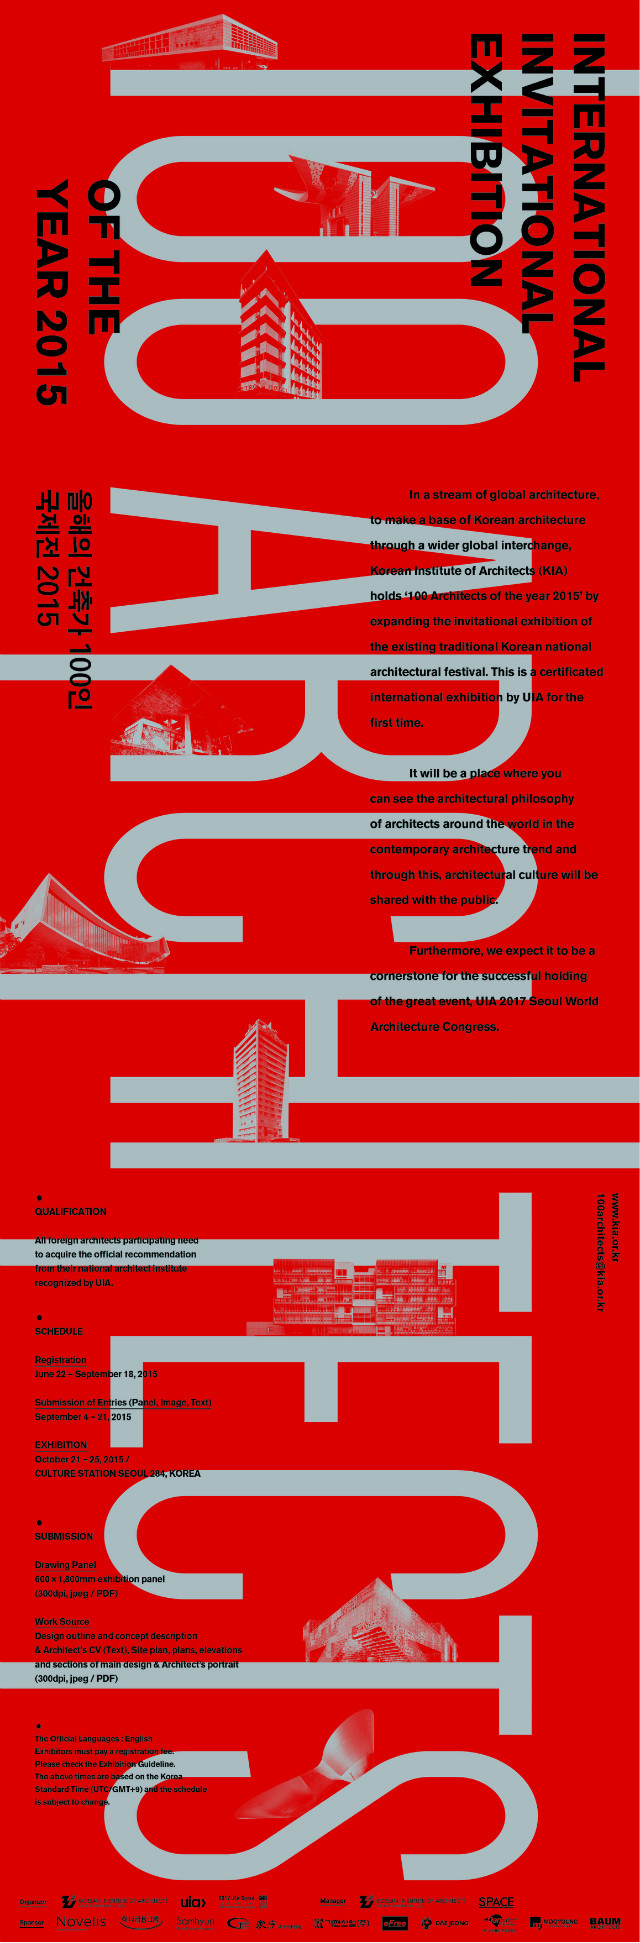 100 Architects of the year 2015_poster_Eng.jpg